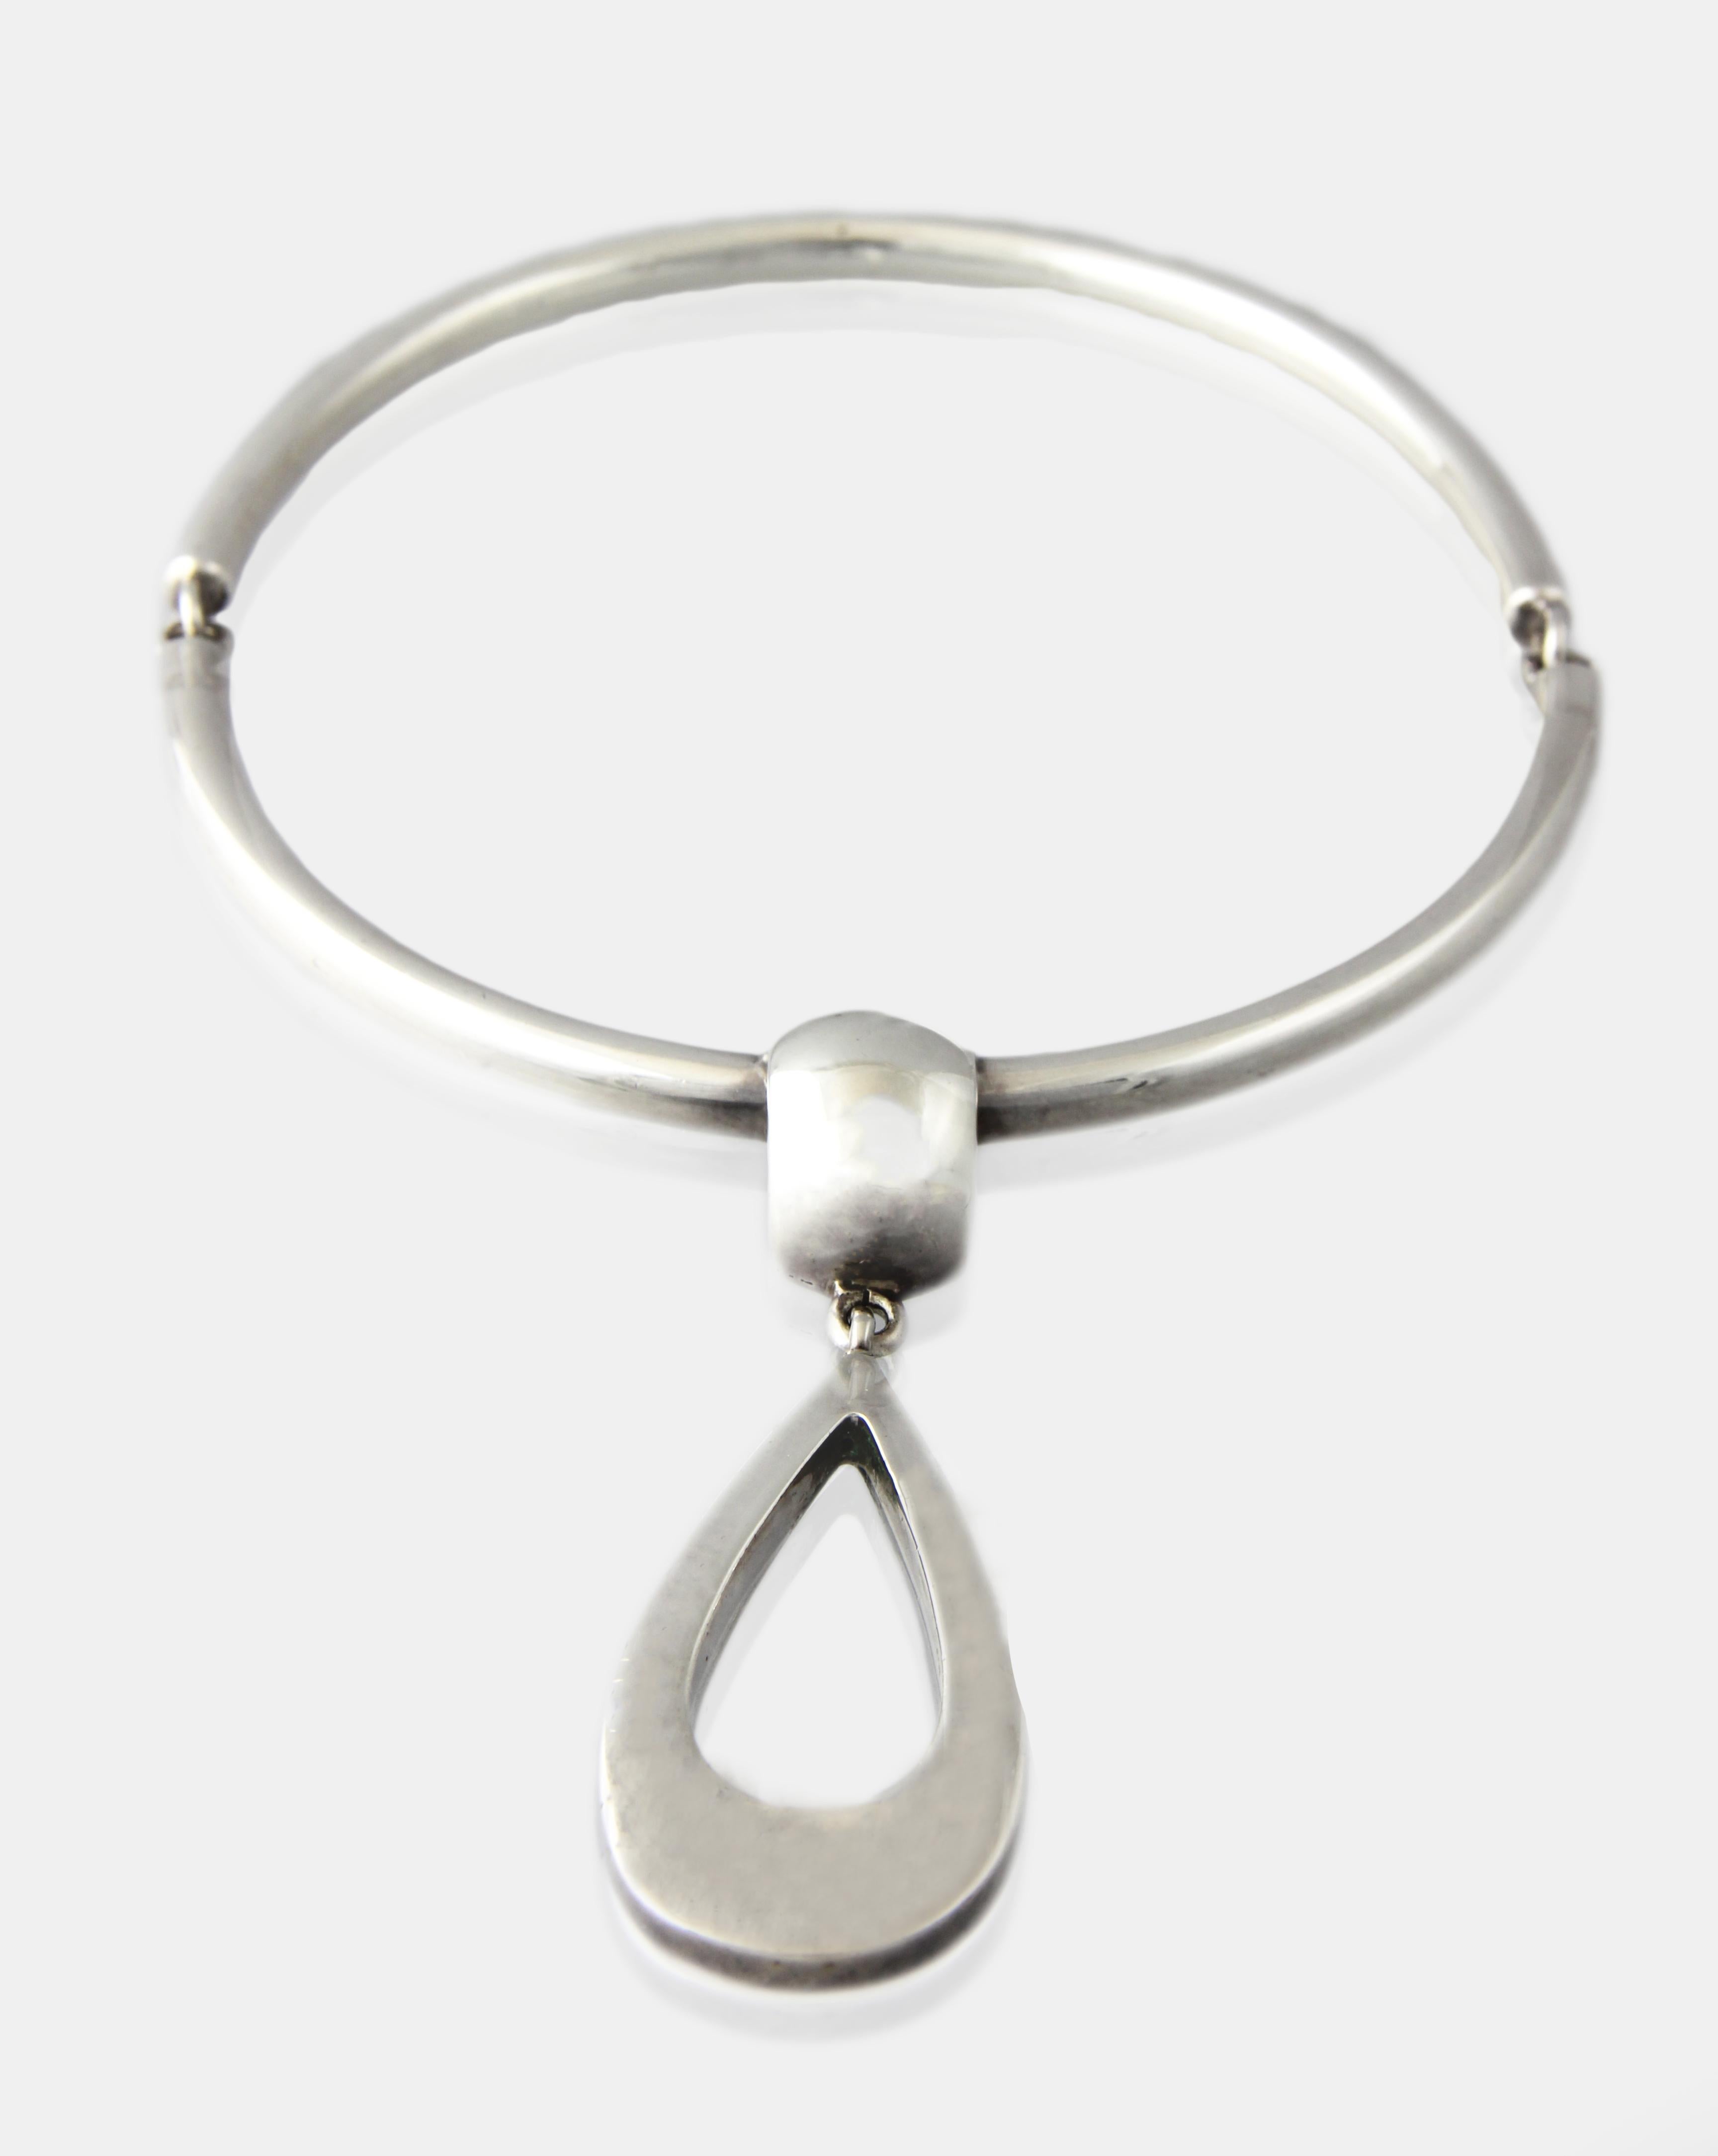 Women's Mid-20th Century Modernist Sterling Pendant Choker Necklace by Joachim S'Paliu For Sale